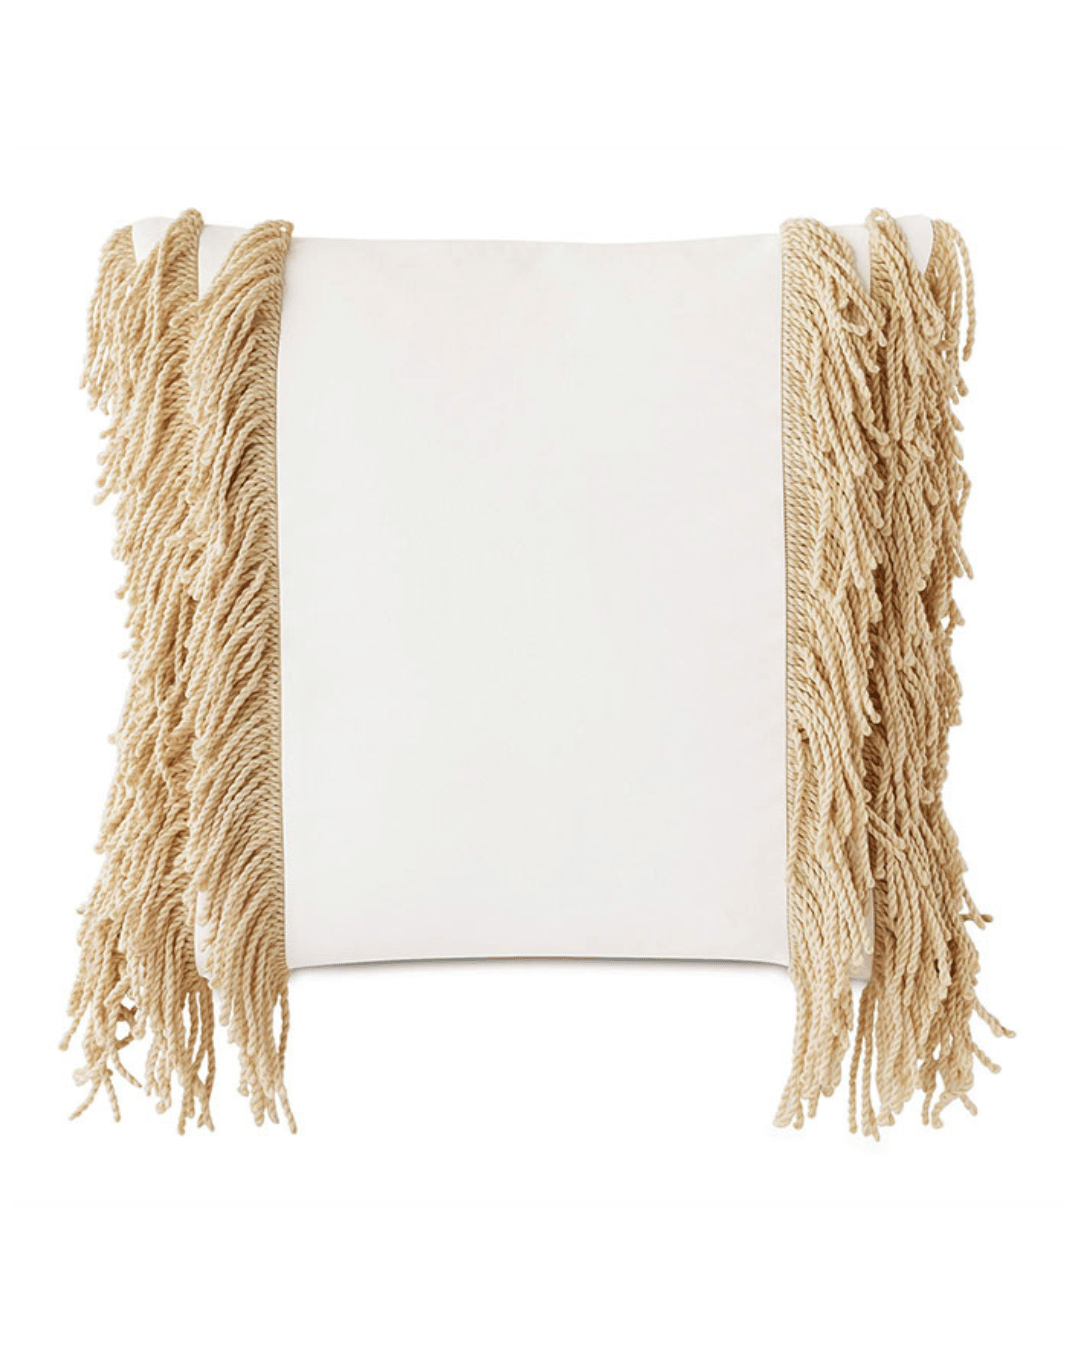 Decorative pillow with beige macrame-style fringes on the sides, displayed on a white background. The central part is plain white, making a contrast with textured edges inspired by Eastern Accents style.